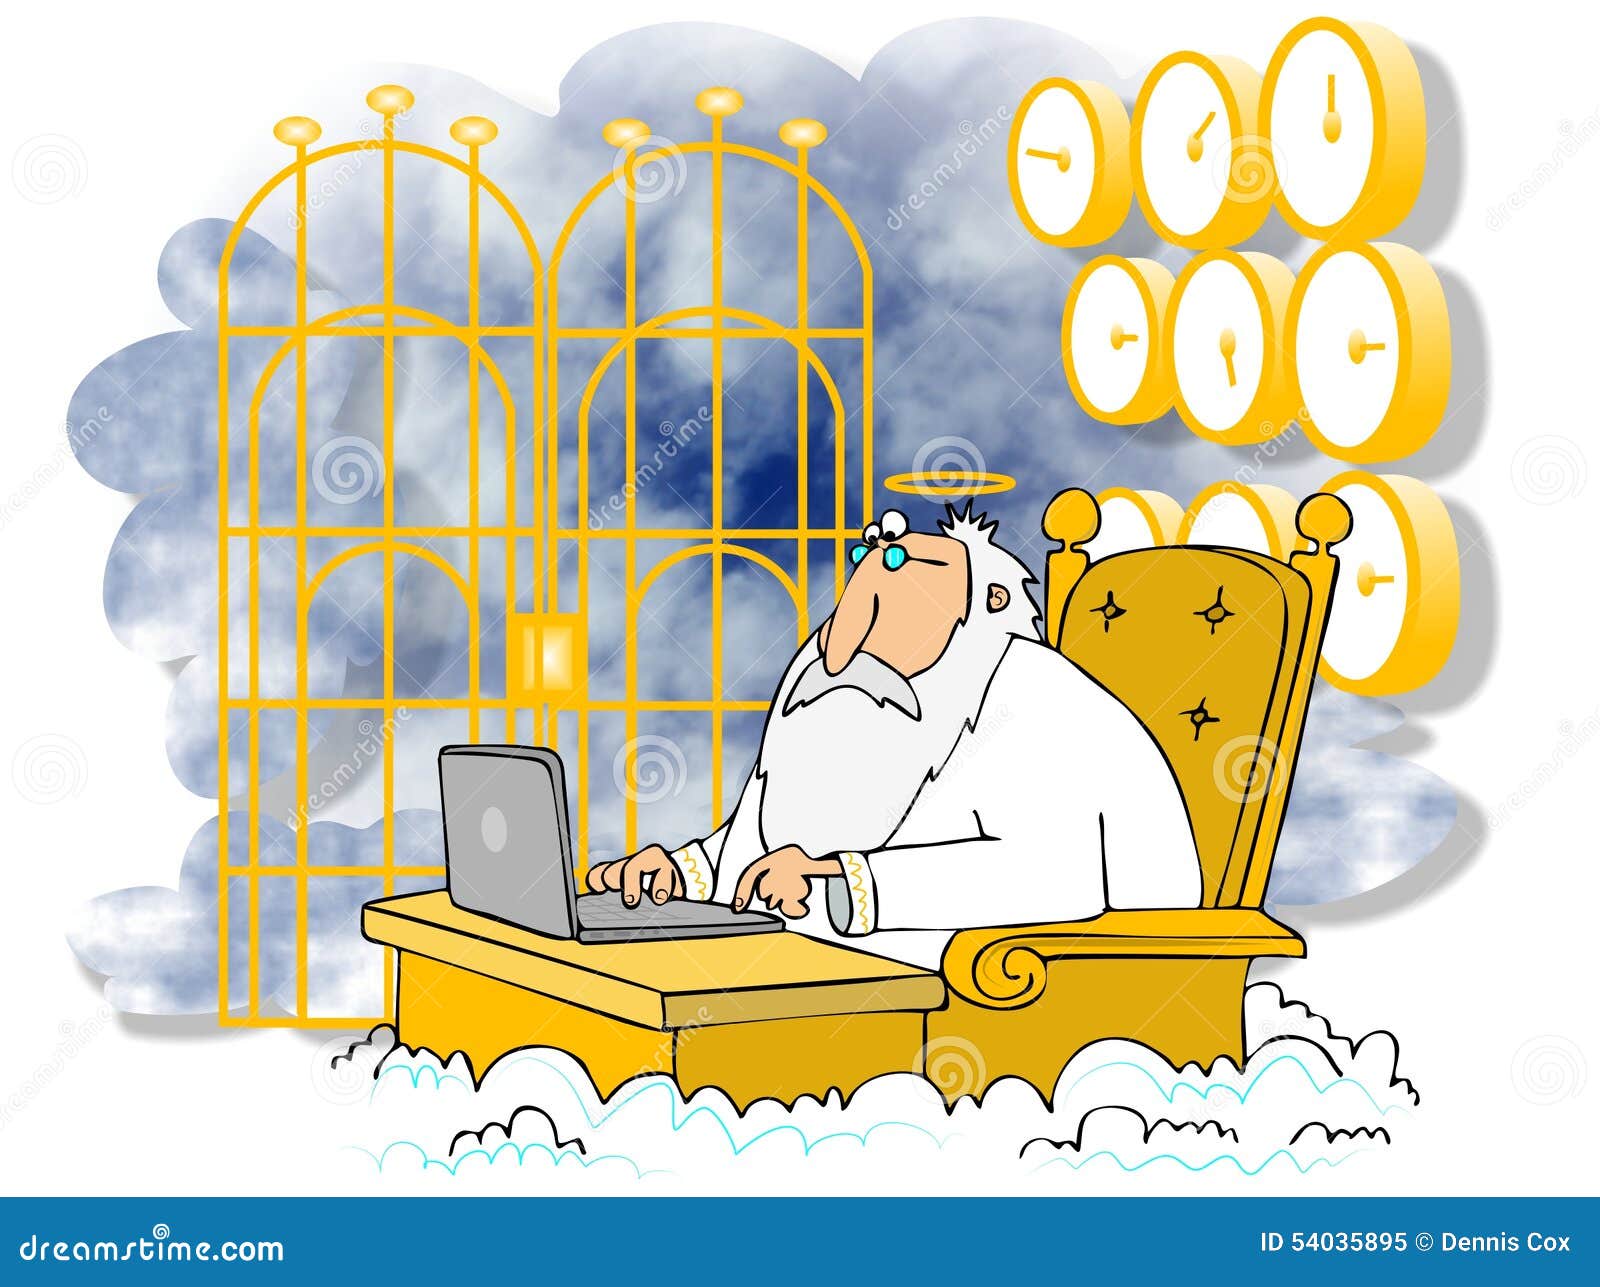 pearly gates clipart - photo #4